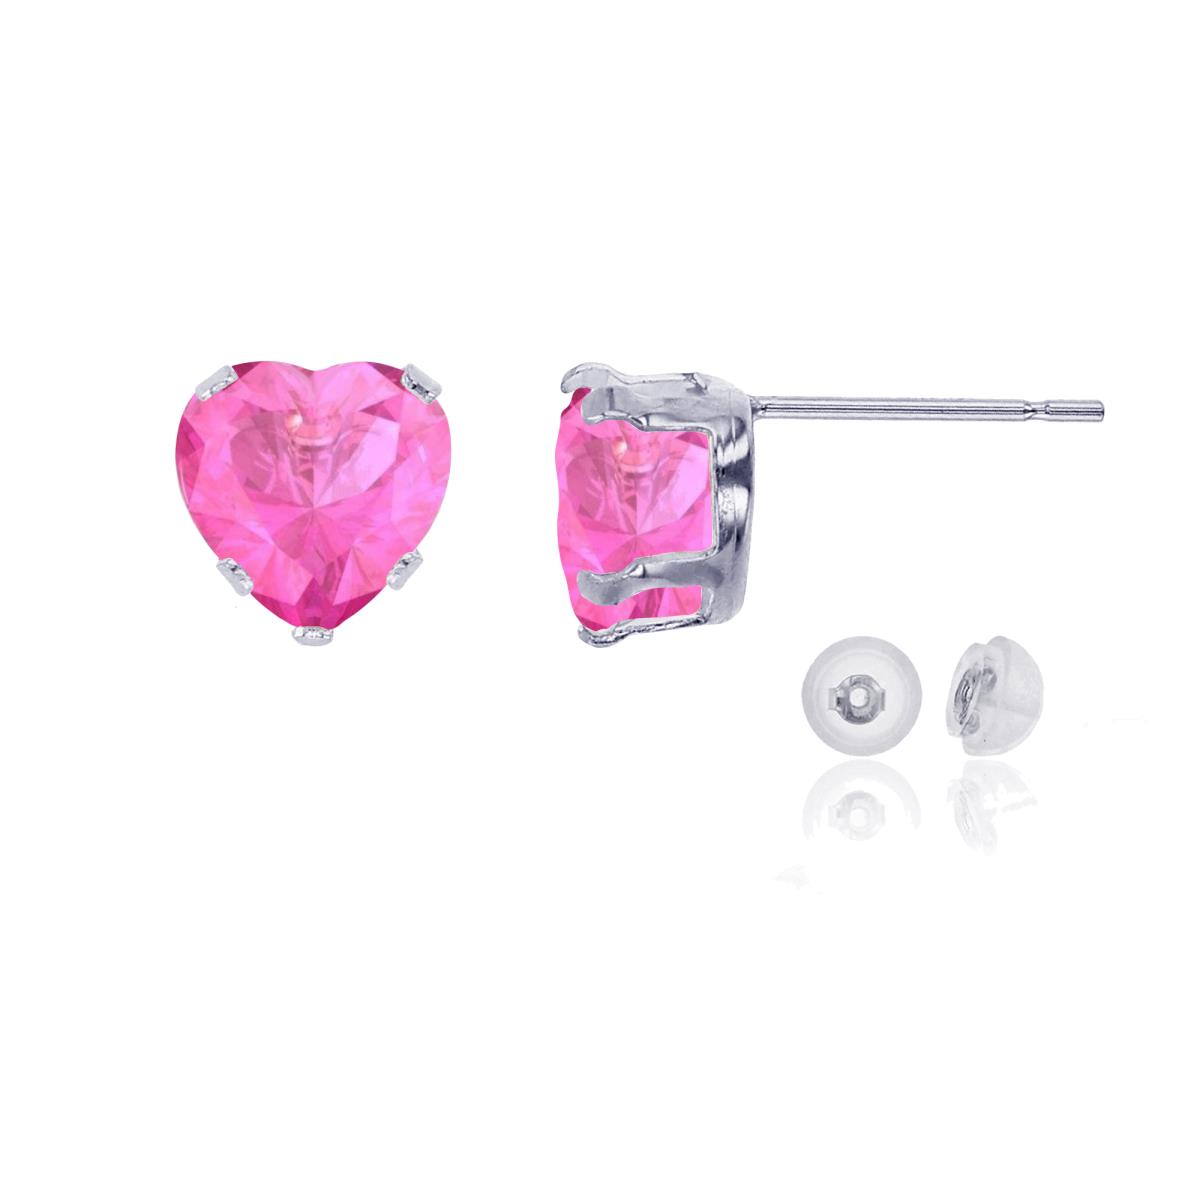 10K White Gold 6x6mm Heart Cr Pink Sapphire Stud Earring with Silicone Back